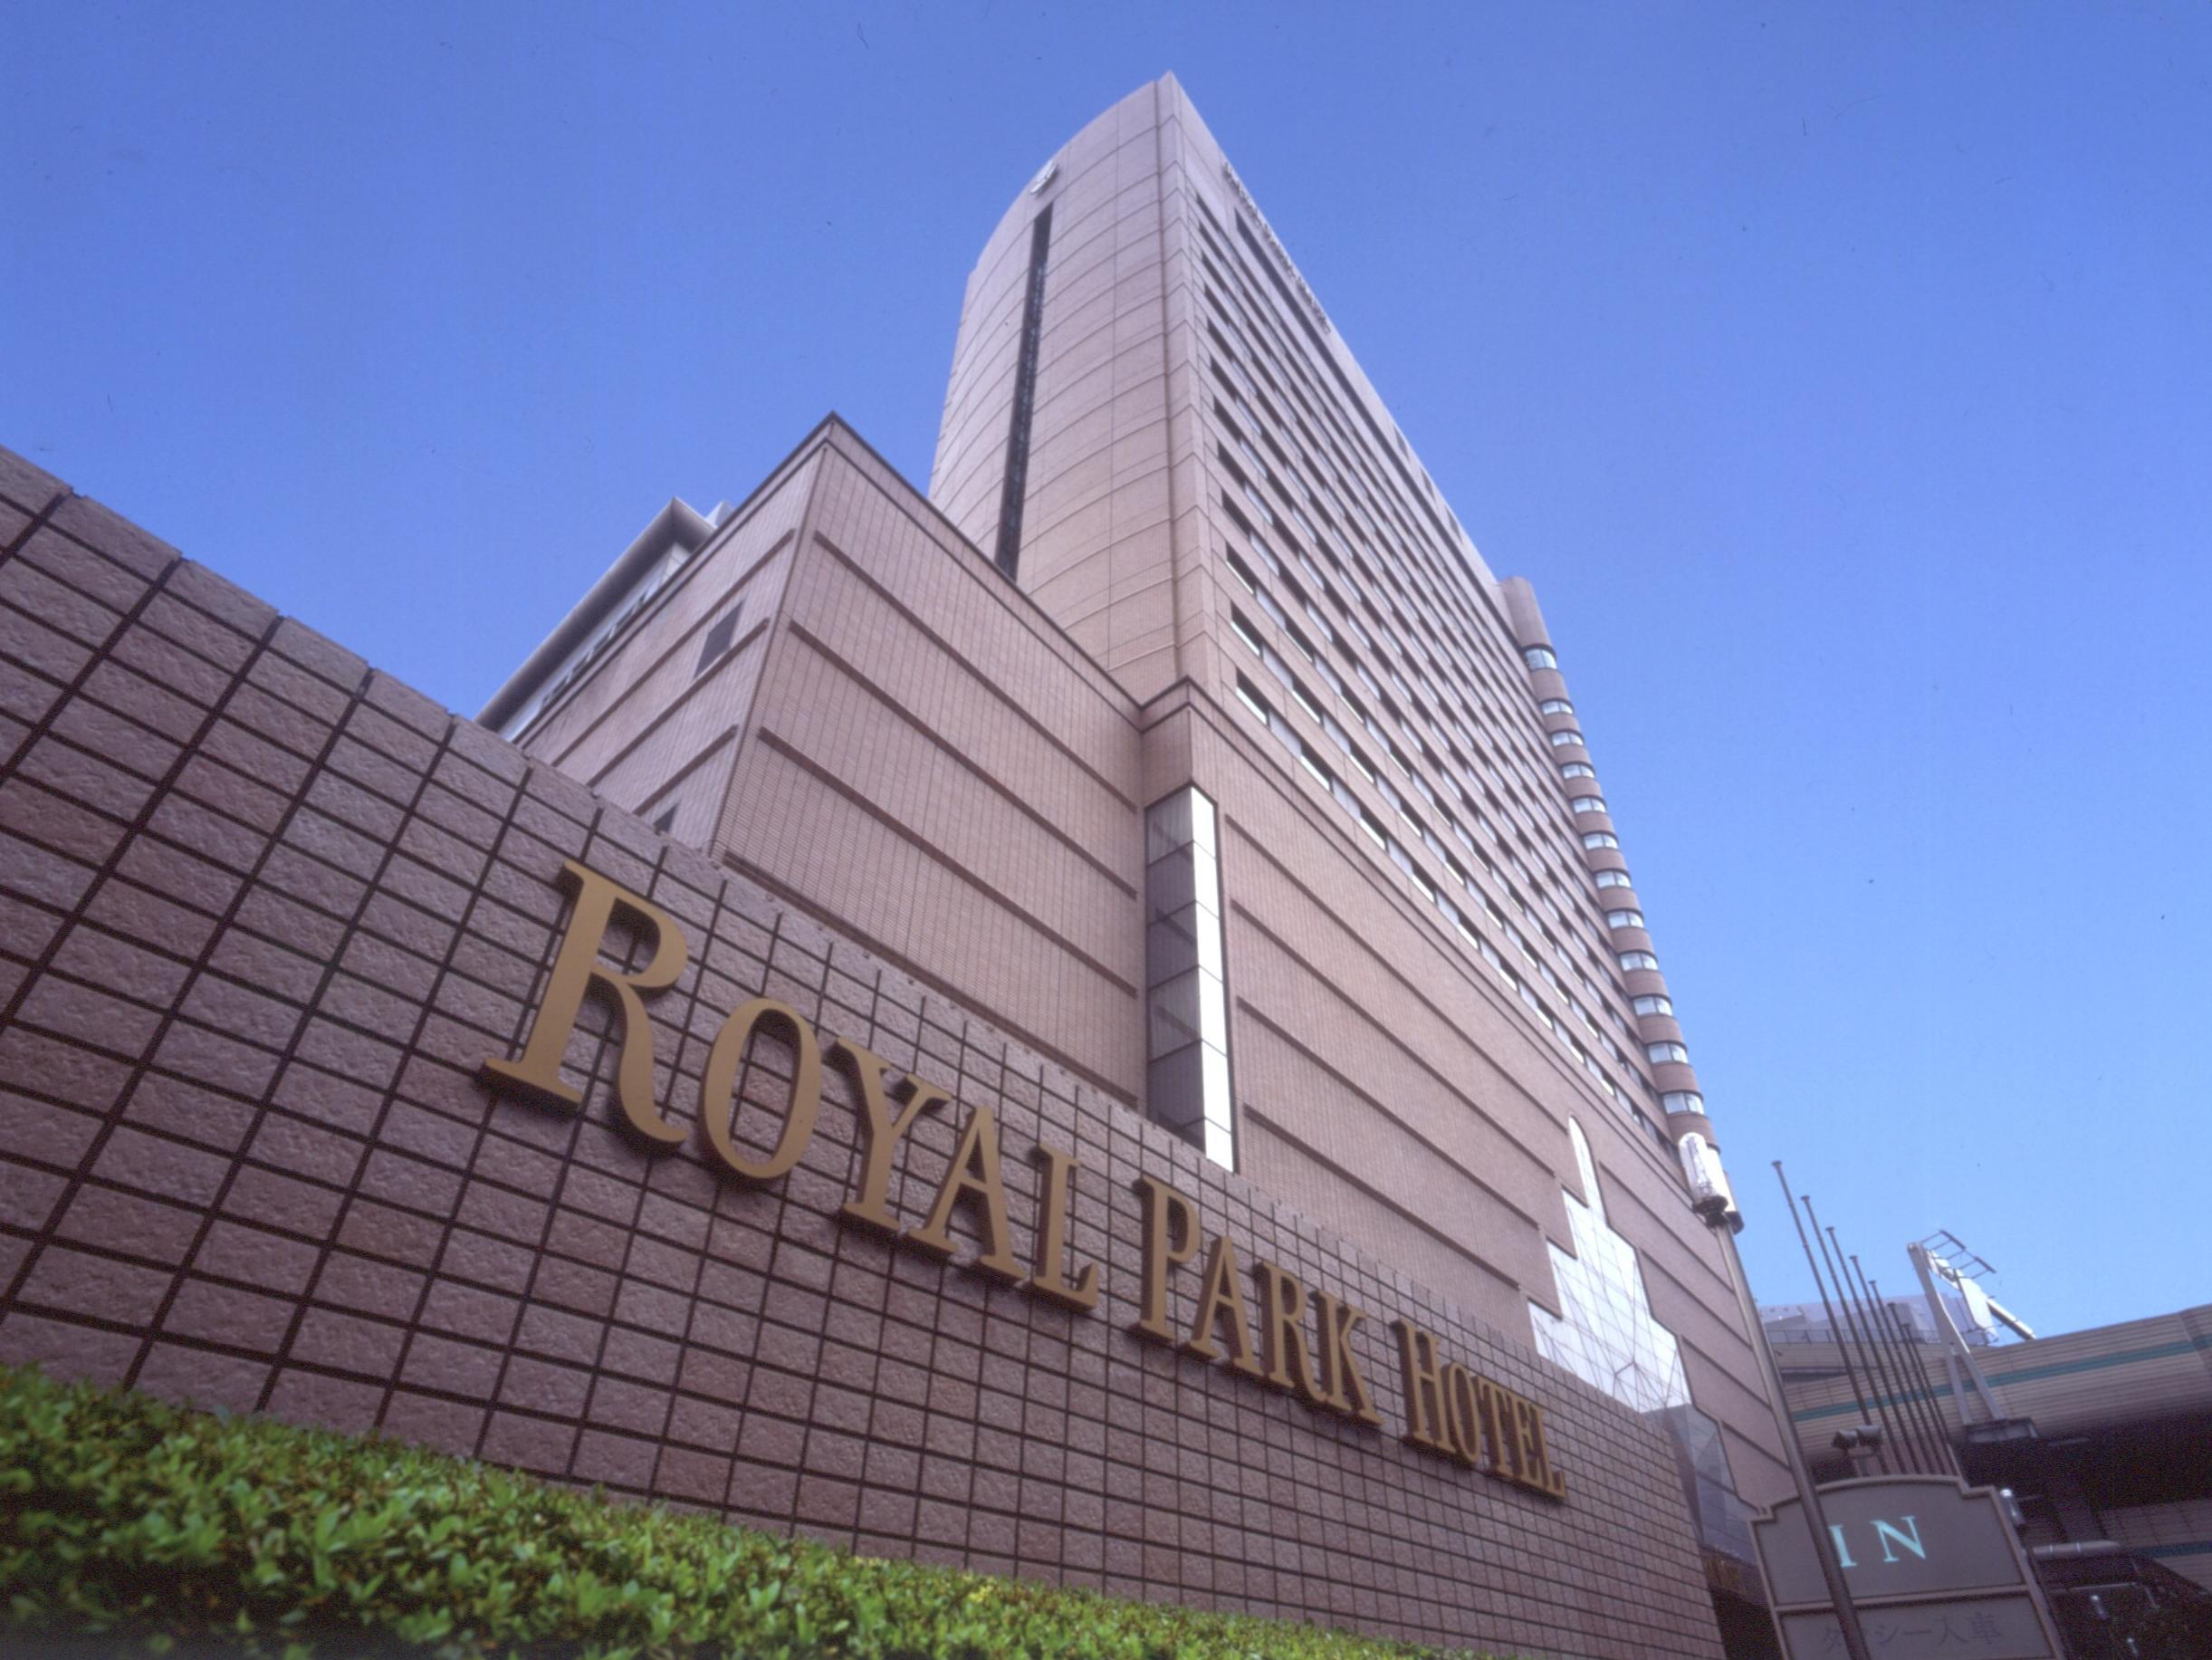 Royal Park Hotel Japan FAQ 2016, What facilities are there in Royal Park Hotel Japan 2016, What Languages Spoken are Supported in Royal Park Hotel Japan 2016, Which payment cards are accepted in Royal Park Hotel Japan , Japan Royal Park Hotel room facilities and services Q&A 2016, Japan Royal Park Hotel online booking services 2016, Japan Royal Park Hotel address 2016, Japan Royal Park Hotel telephone number 2016,Japan Royal Park Hotel map 2016, Japan Royal Park Hotel traffic guide 2016, how to go Japan Royal Park Hotel, Japan Royal Park Hotel booking online 2016, Japan Royal Park Hotel room types 2016.